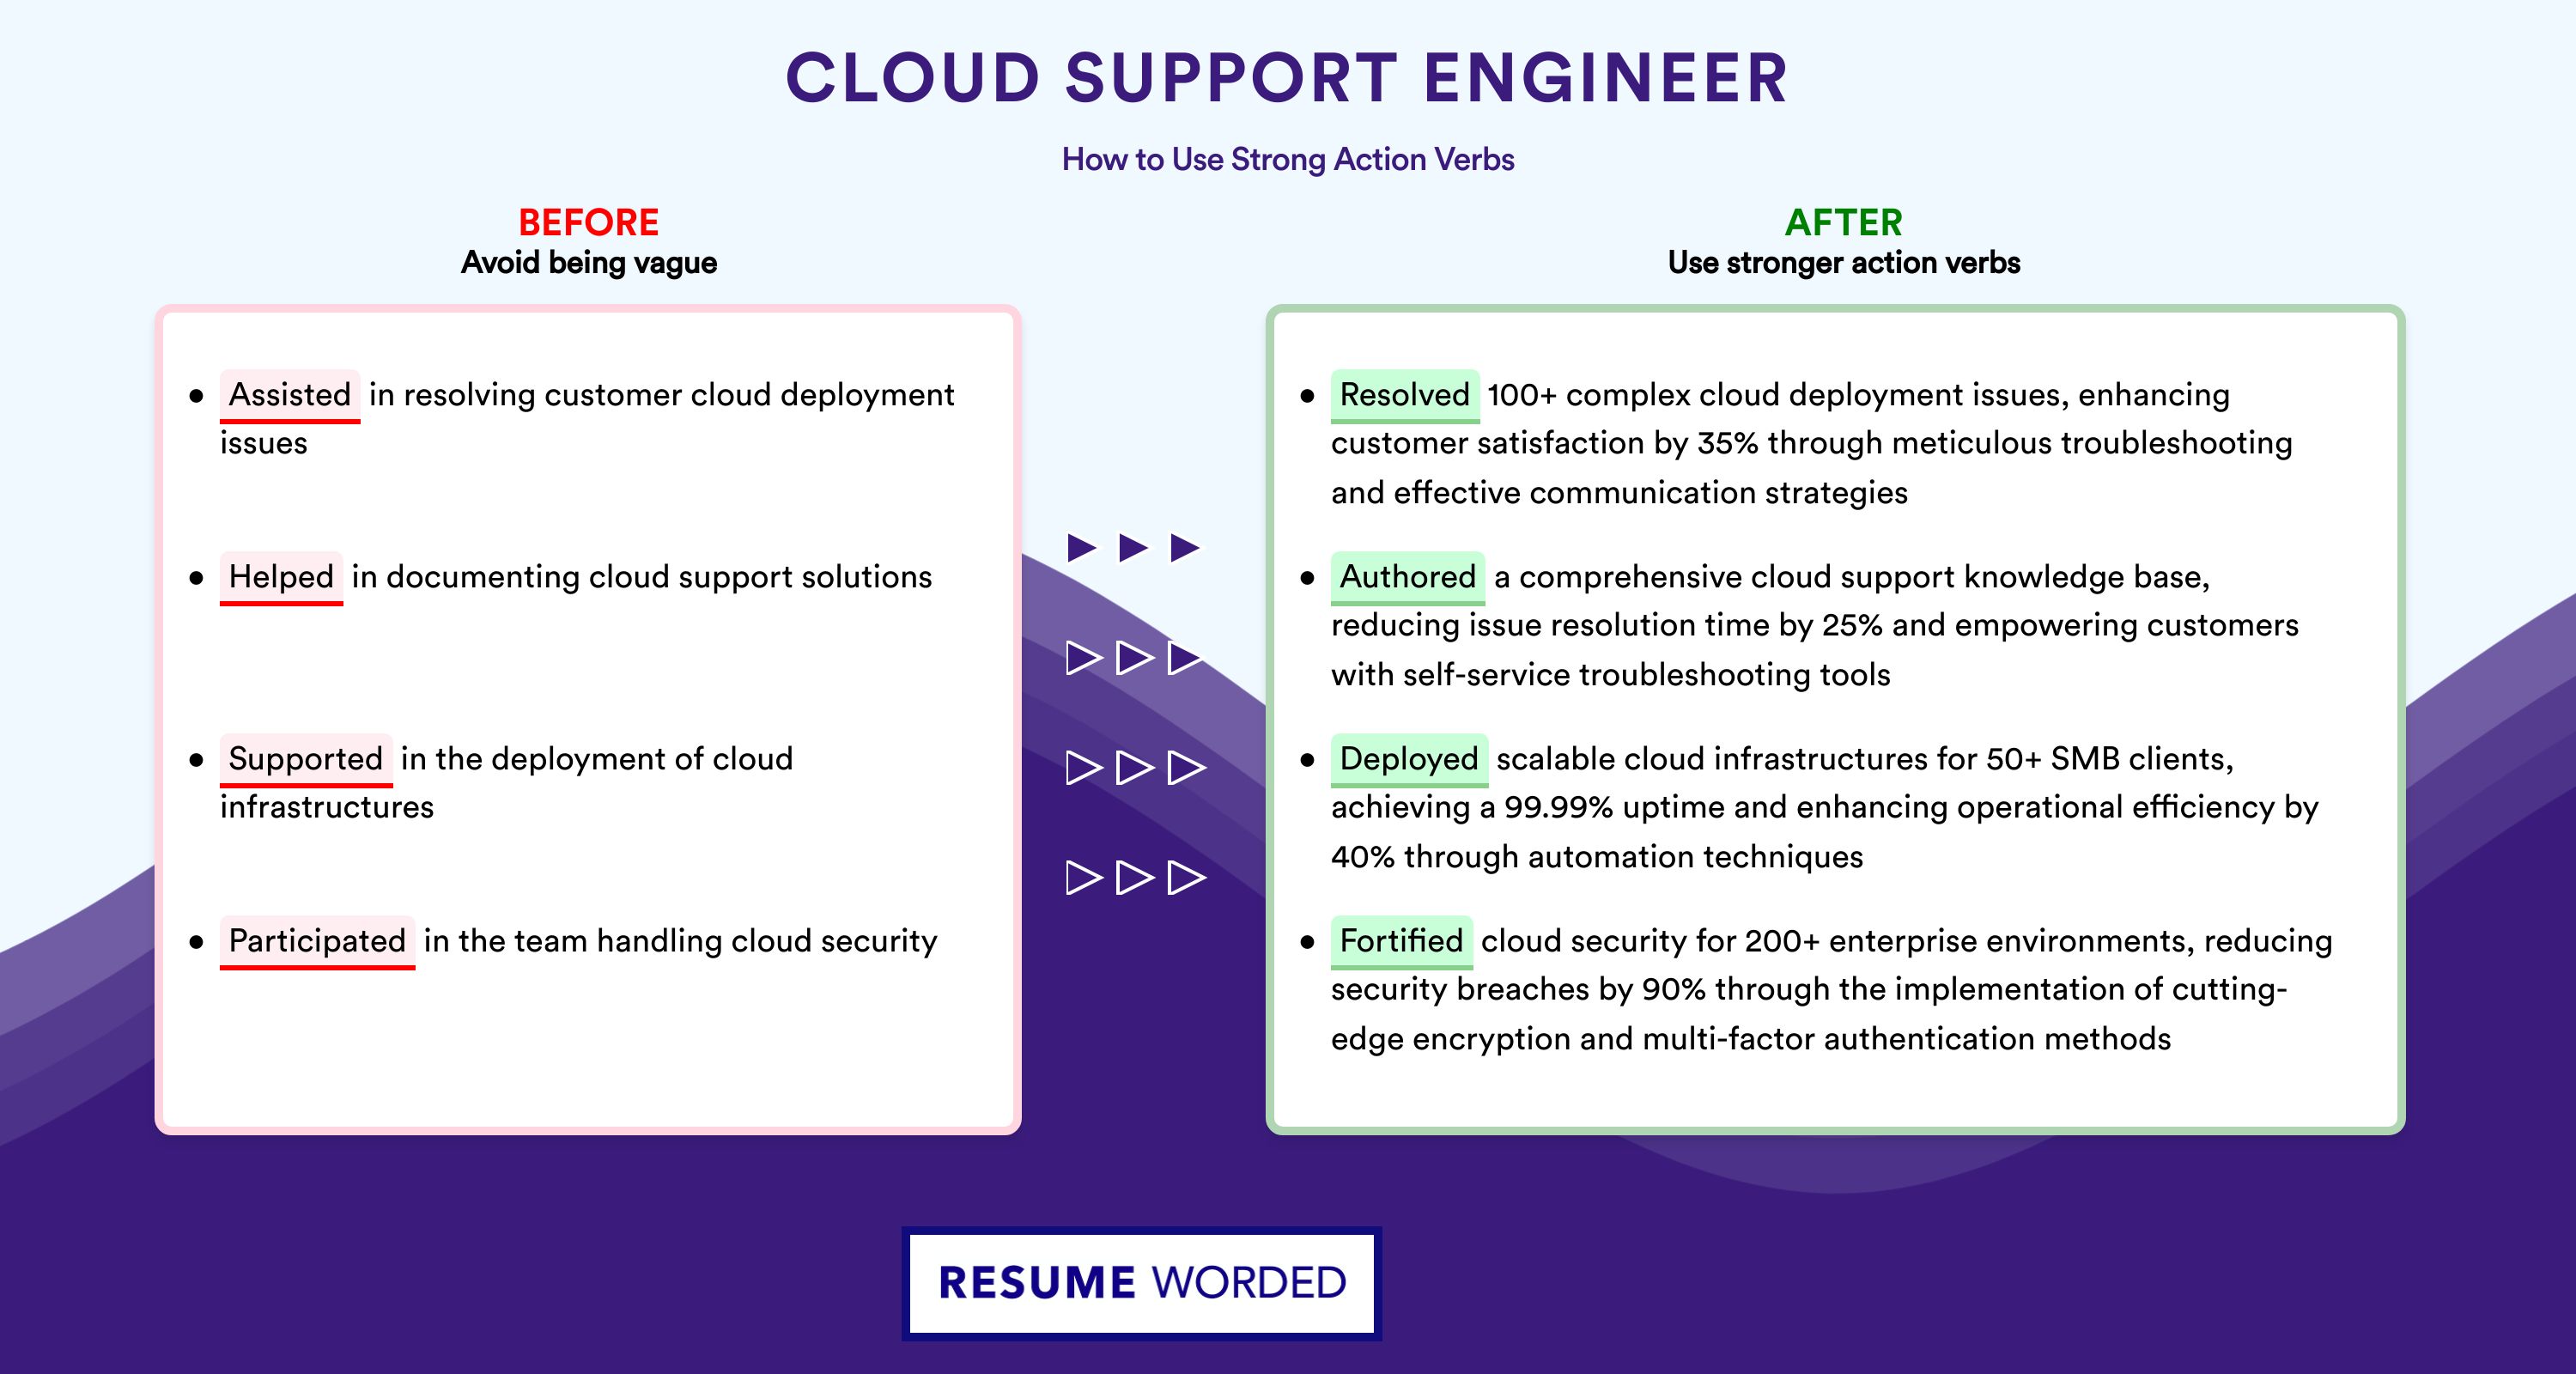 Action Verbs for Cloud Support Engineer